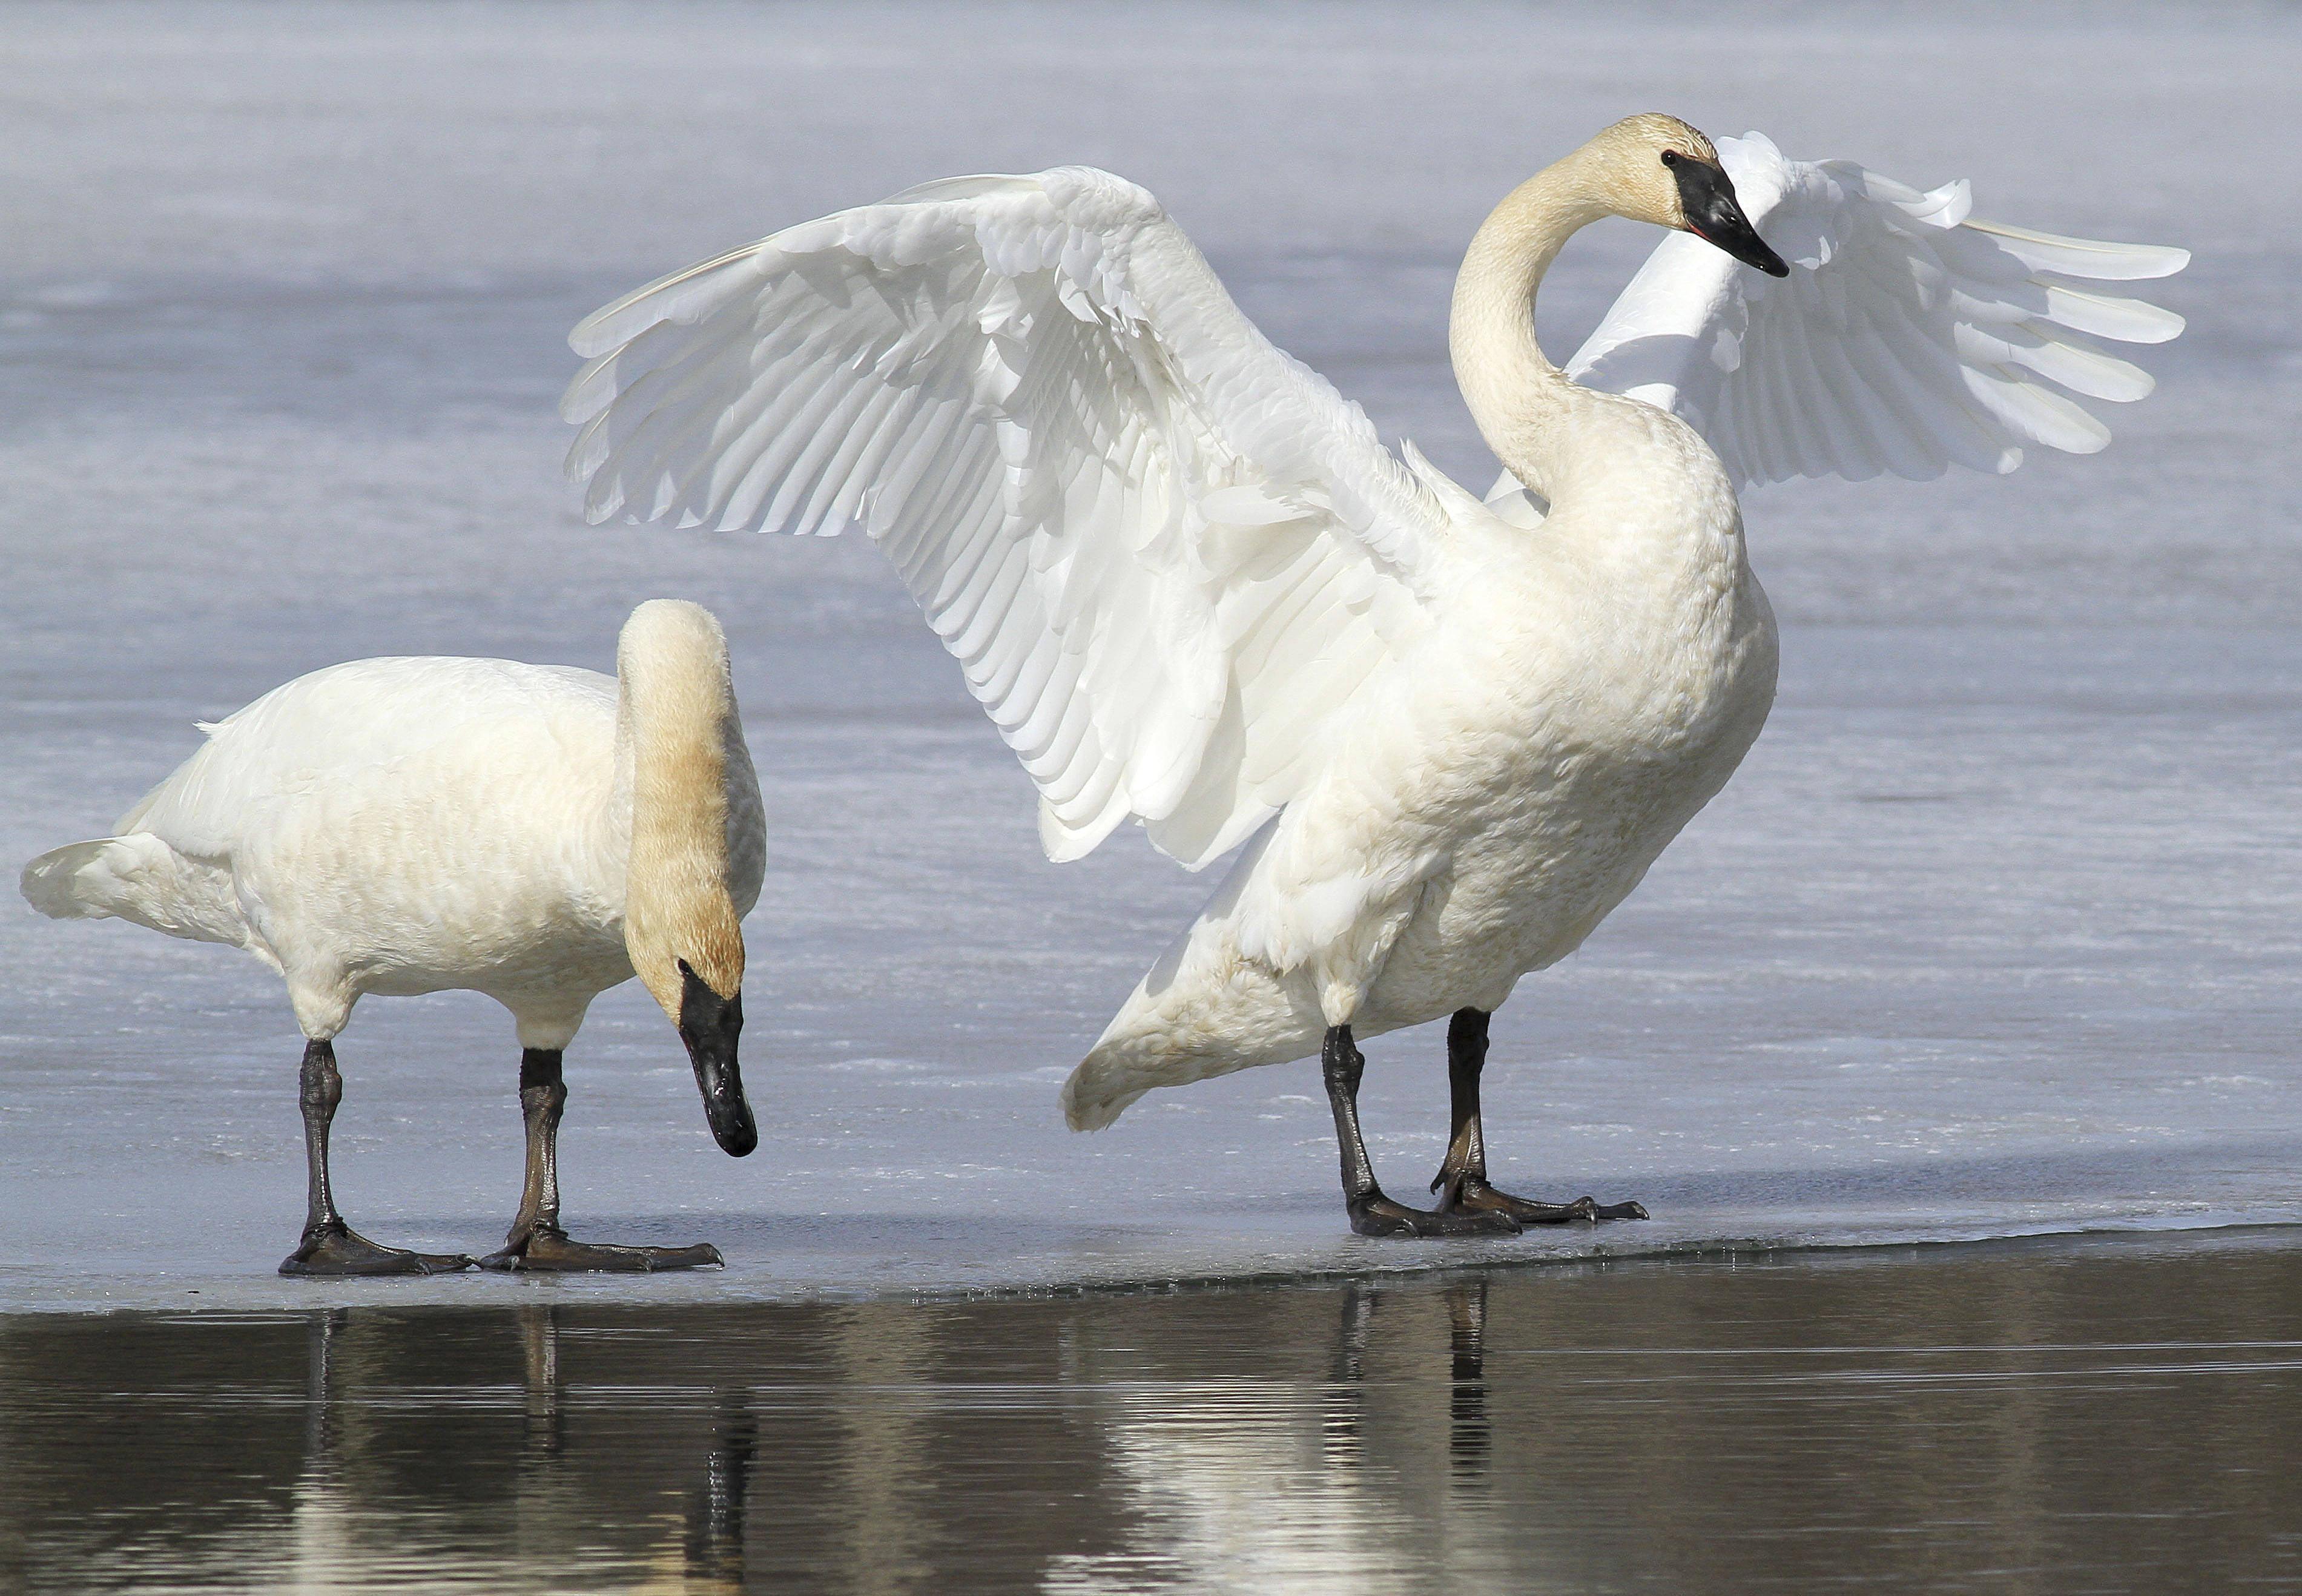 Swan illegally shot and killed in Central Oregon | The Spokesman-Review